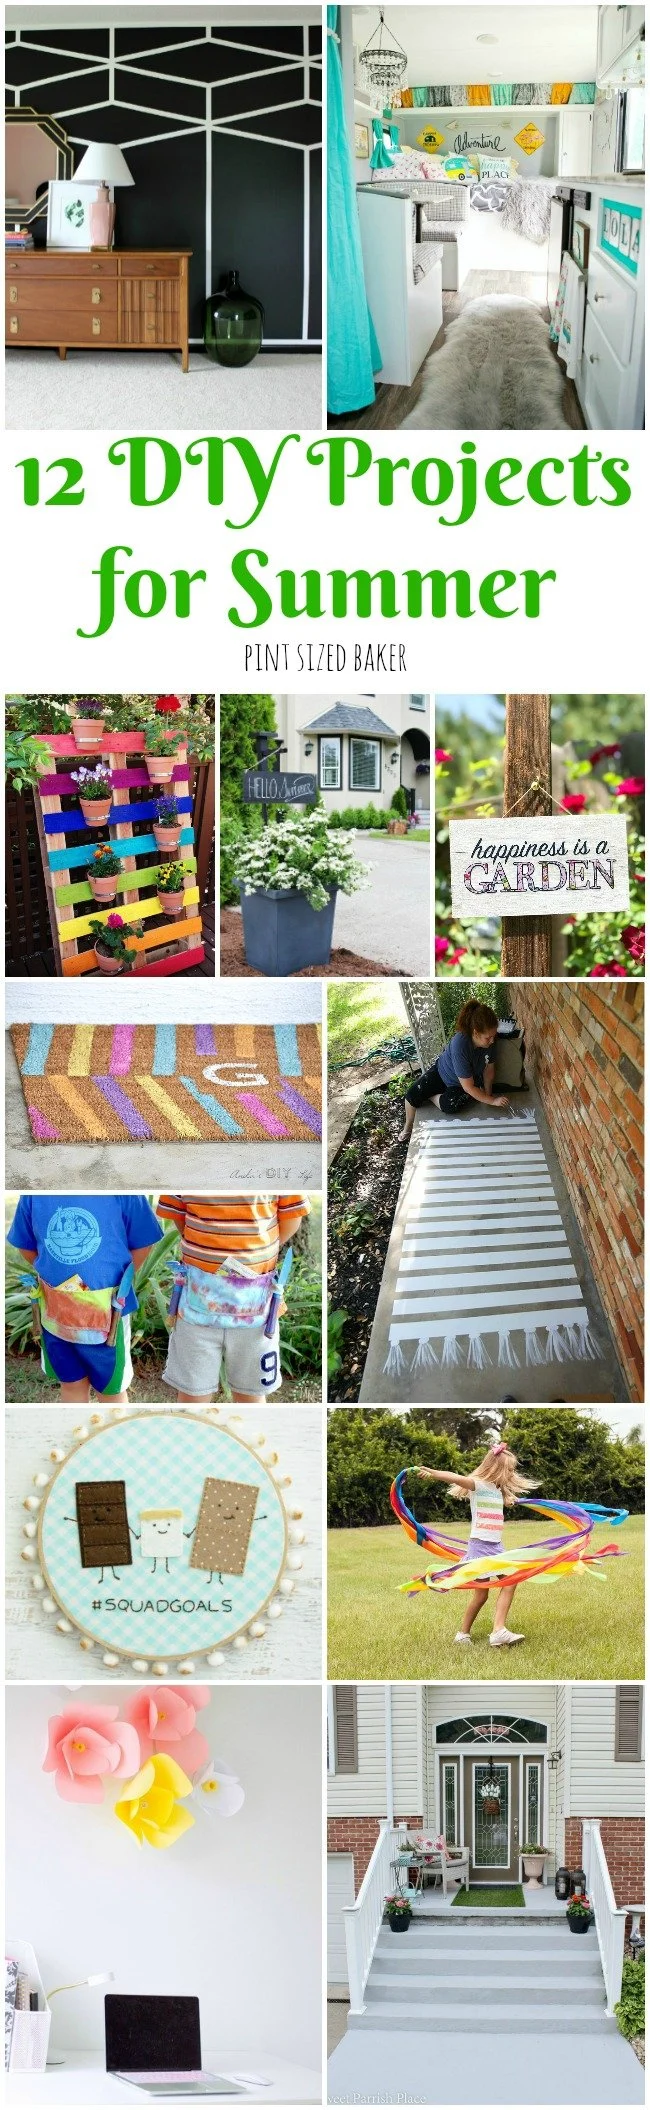 12 DIY projects for summer to keep you and the kids busy. From painting a room to building a flower garden There's something for every ability.